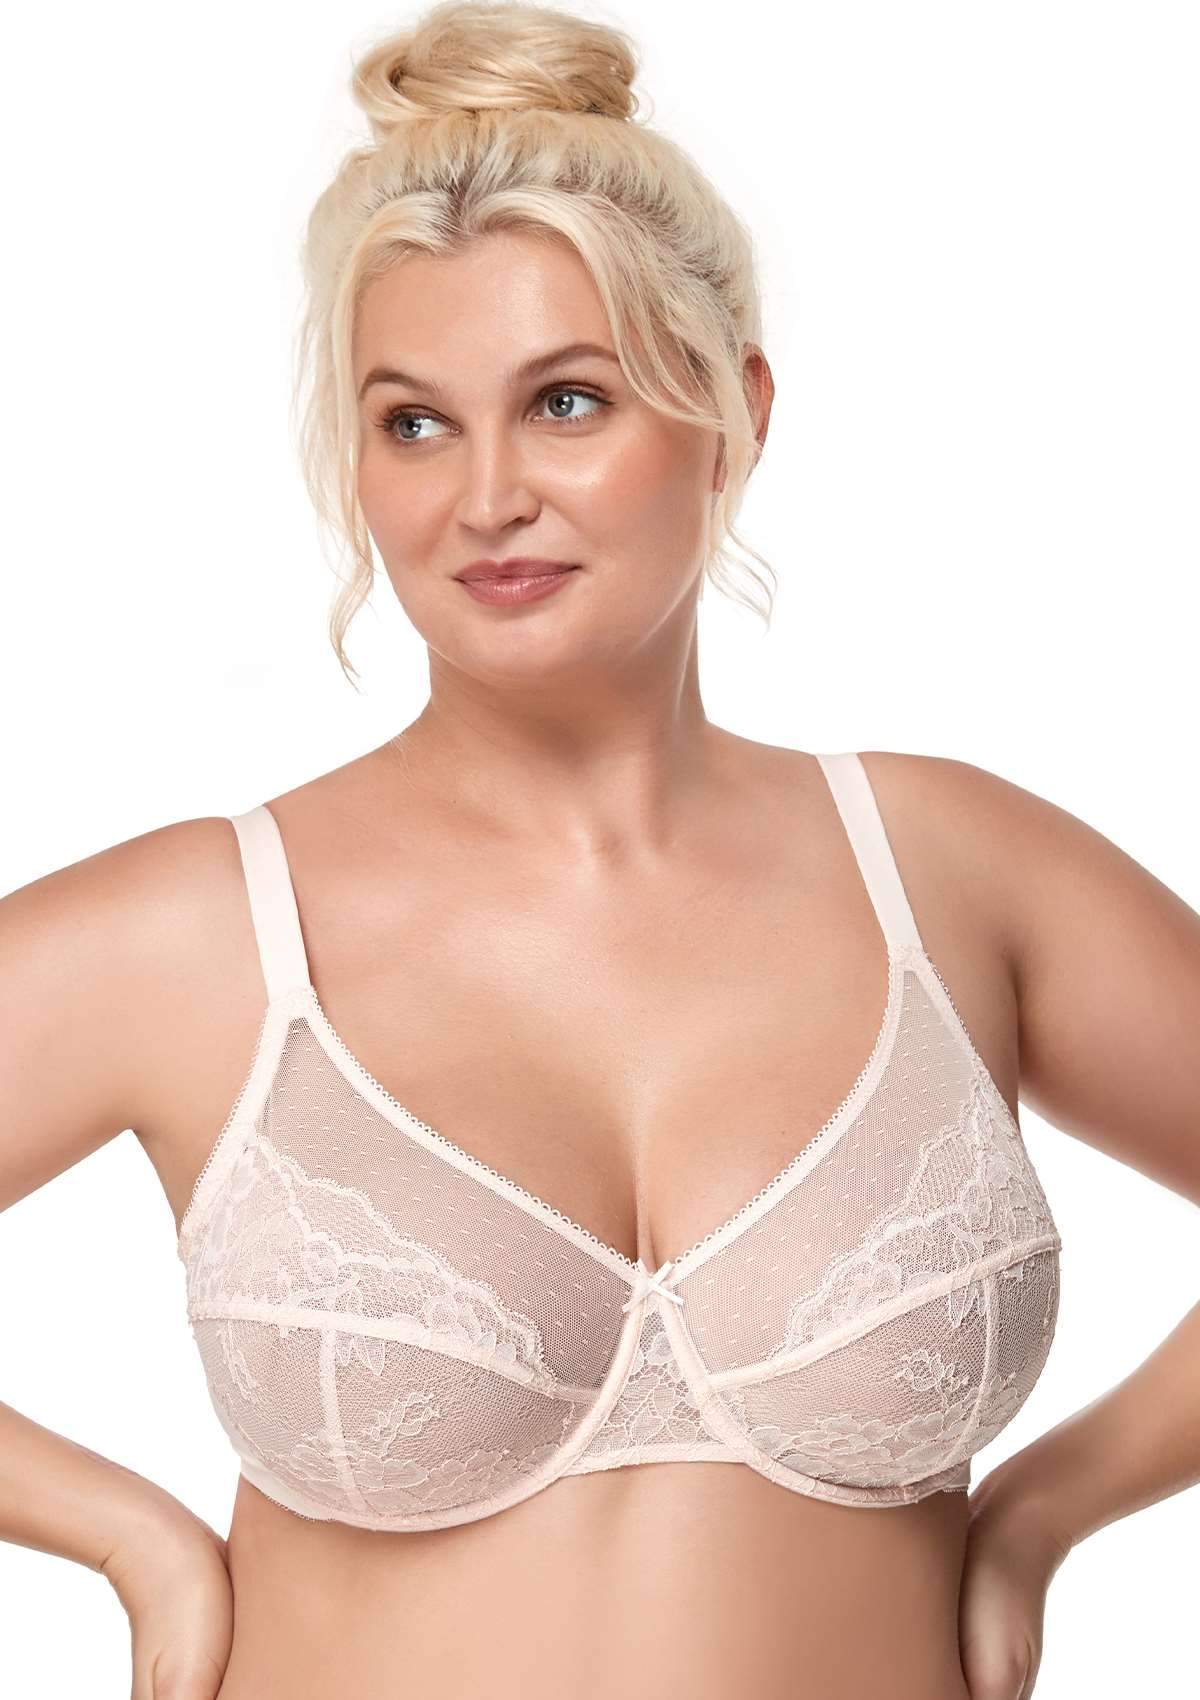 HSIA Enchante Lacy Bra: Comfy Sheer Lace Bra With Lift - Dusty Peach / 34 / D